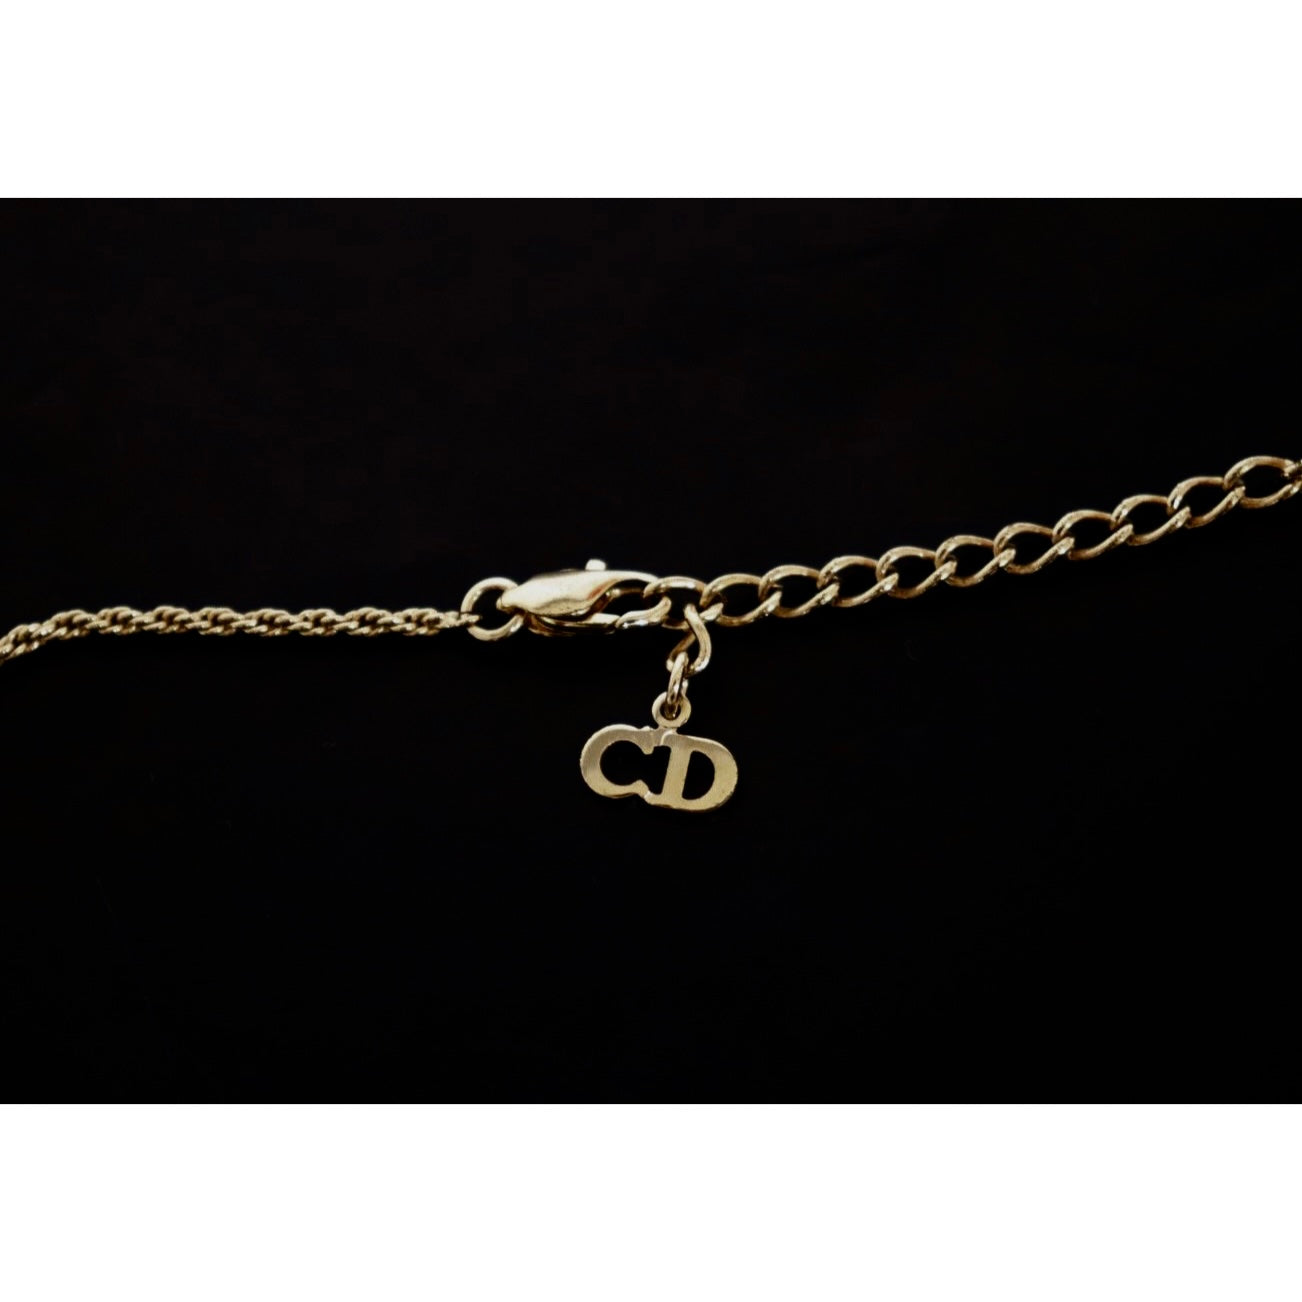 CD necklace 18k japan gold, Women's Fashion, Jewelry & Organizers, Necklaces  on Carousell